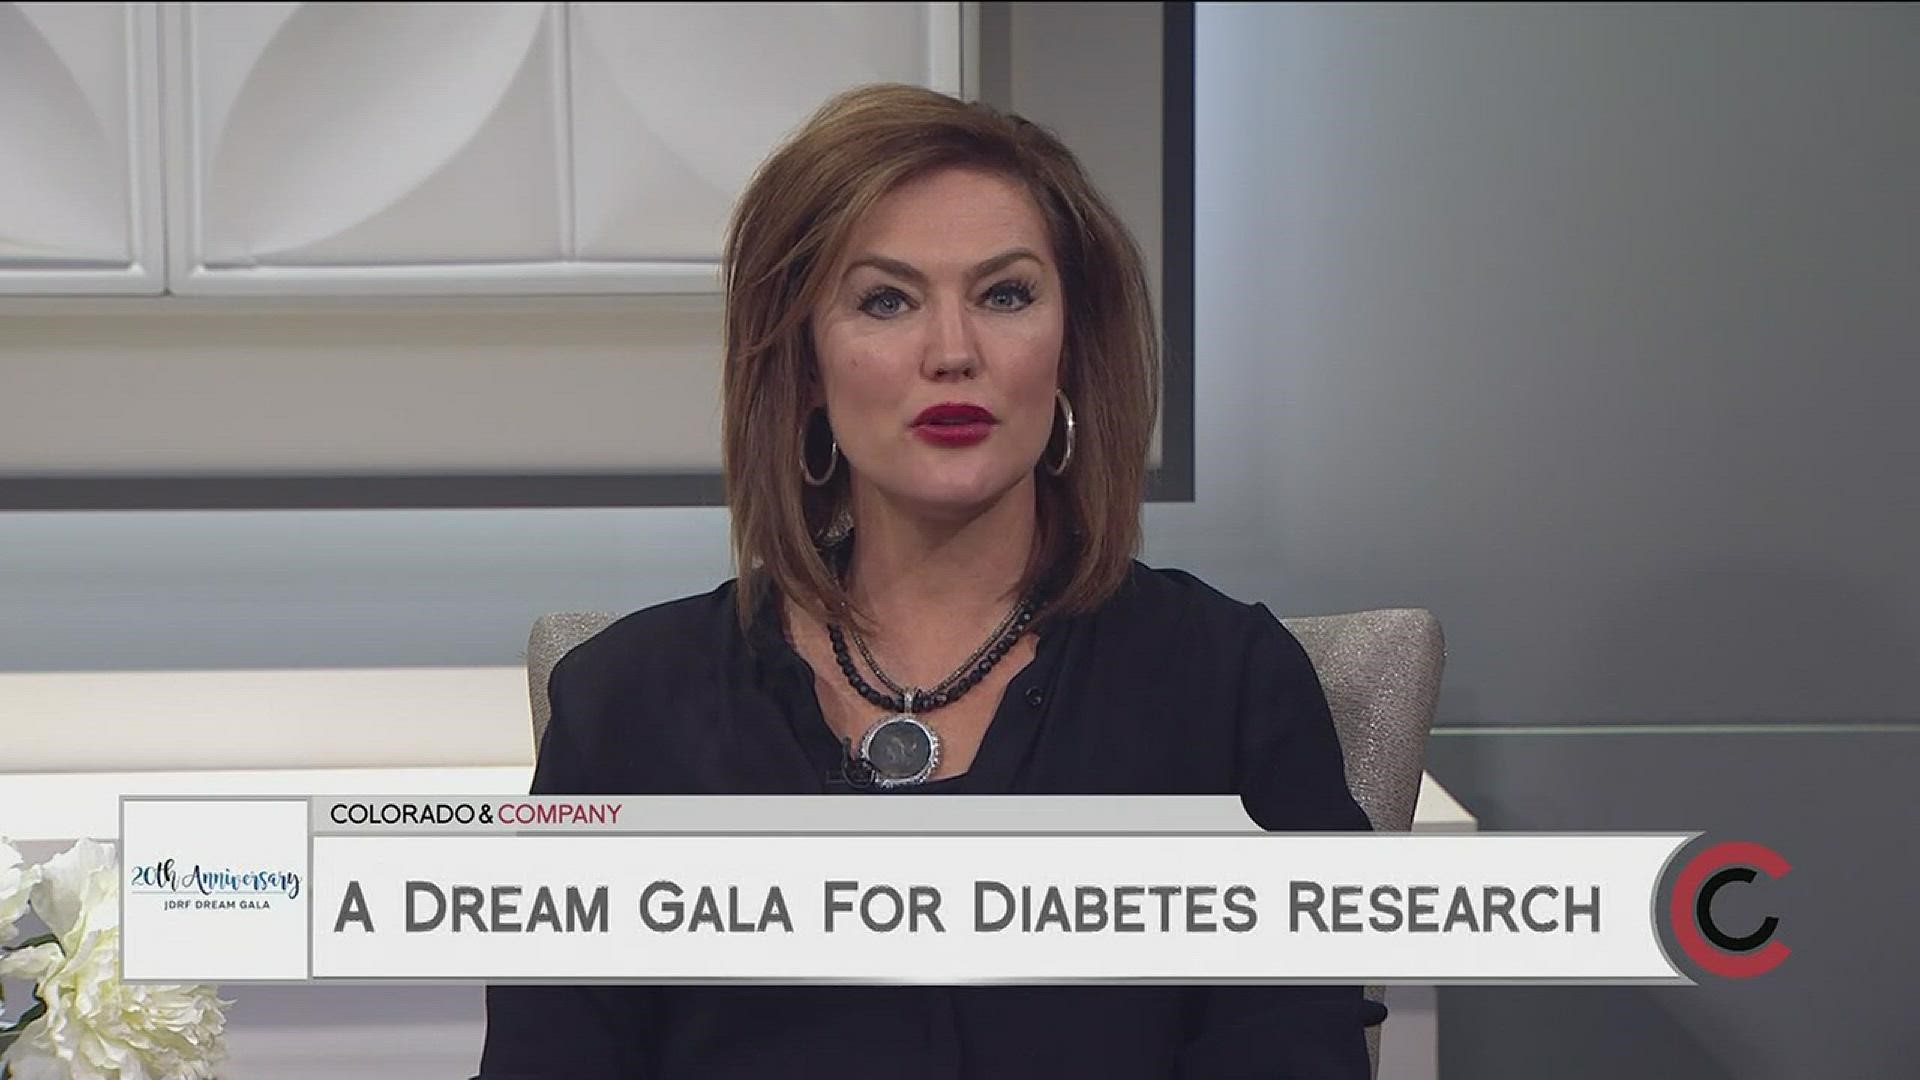 Help support juvenile diabetes research by attending the Dream Gala on April 13th at the Hyatt Regency Convention Center. Enjoy a fabulous dinner and exciting auction. For tickets and more info, visit www.JDRF.org/RockyMountain. 
THIS INTERVIEW HAS COMMERCIAL CONTENT. PRODUCTS AND SERVICES FEATURED APPEAR AS PAID ADVERTISING.